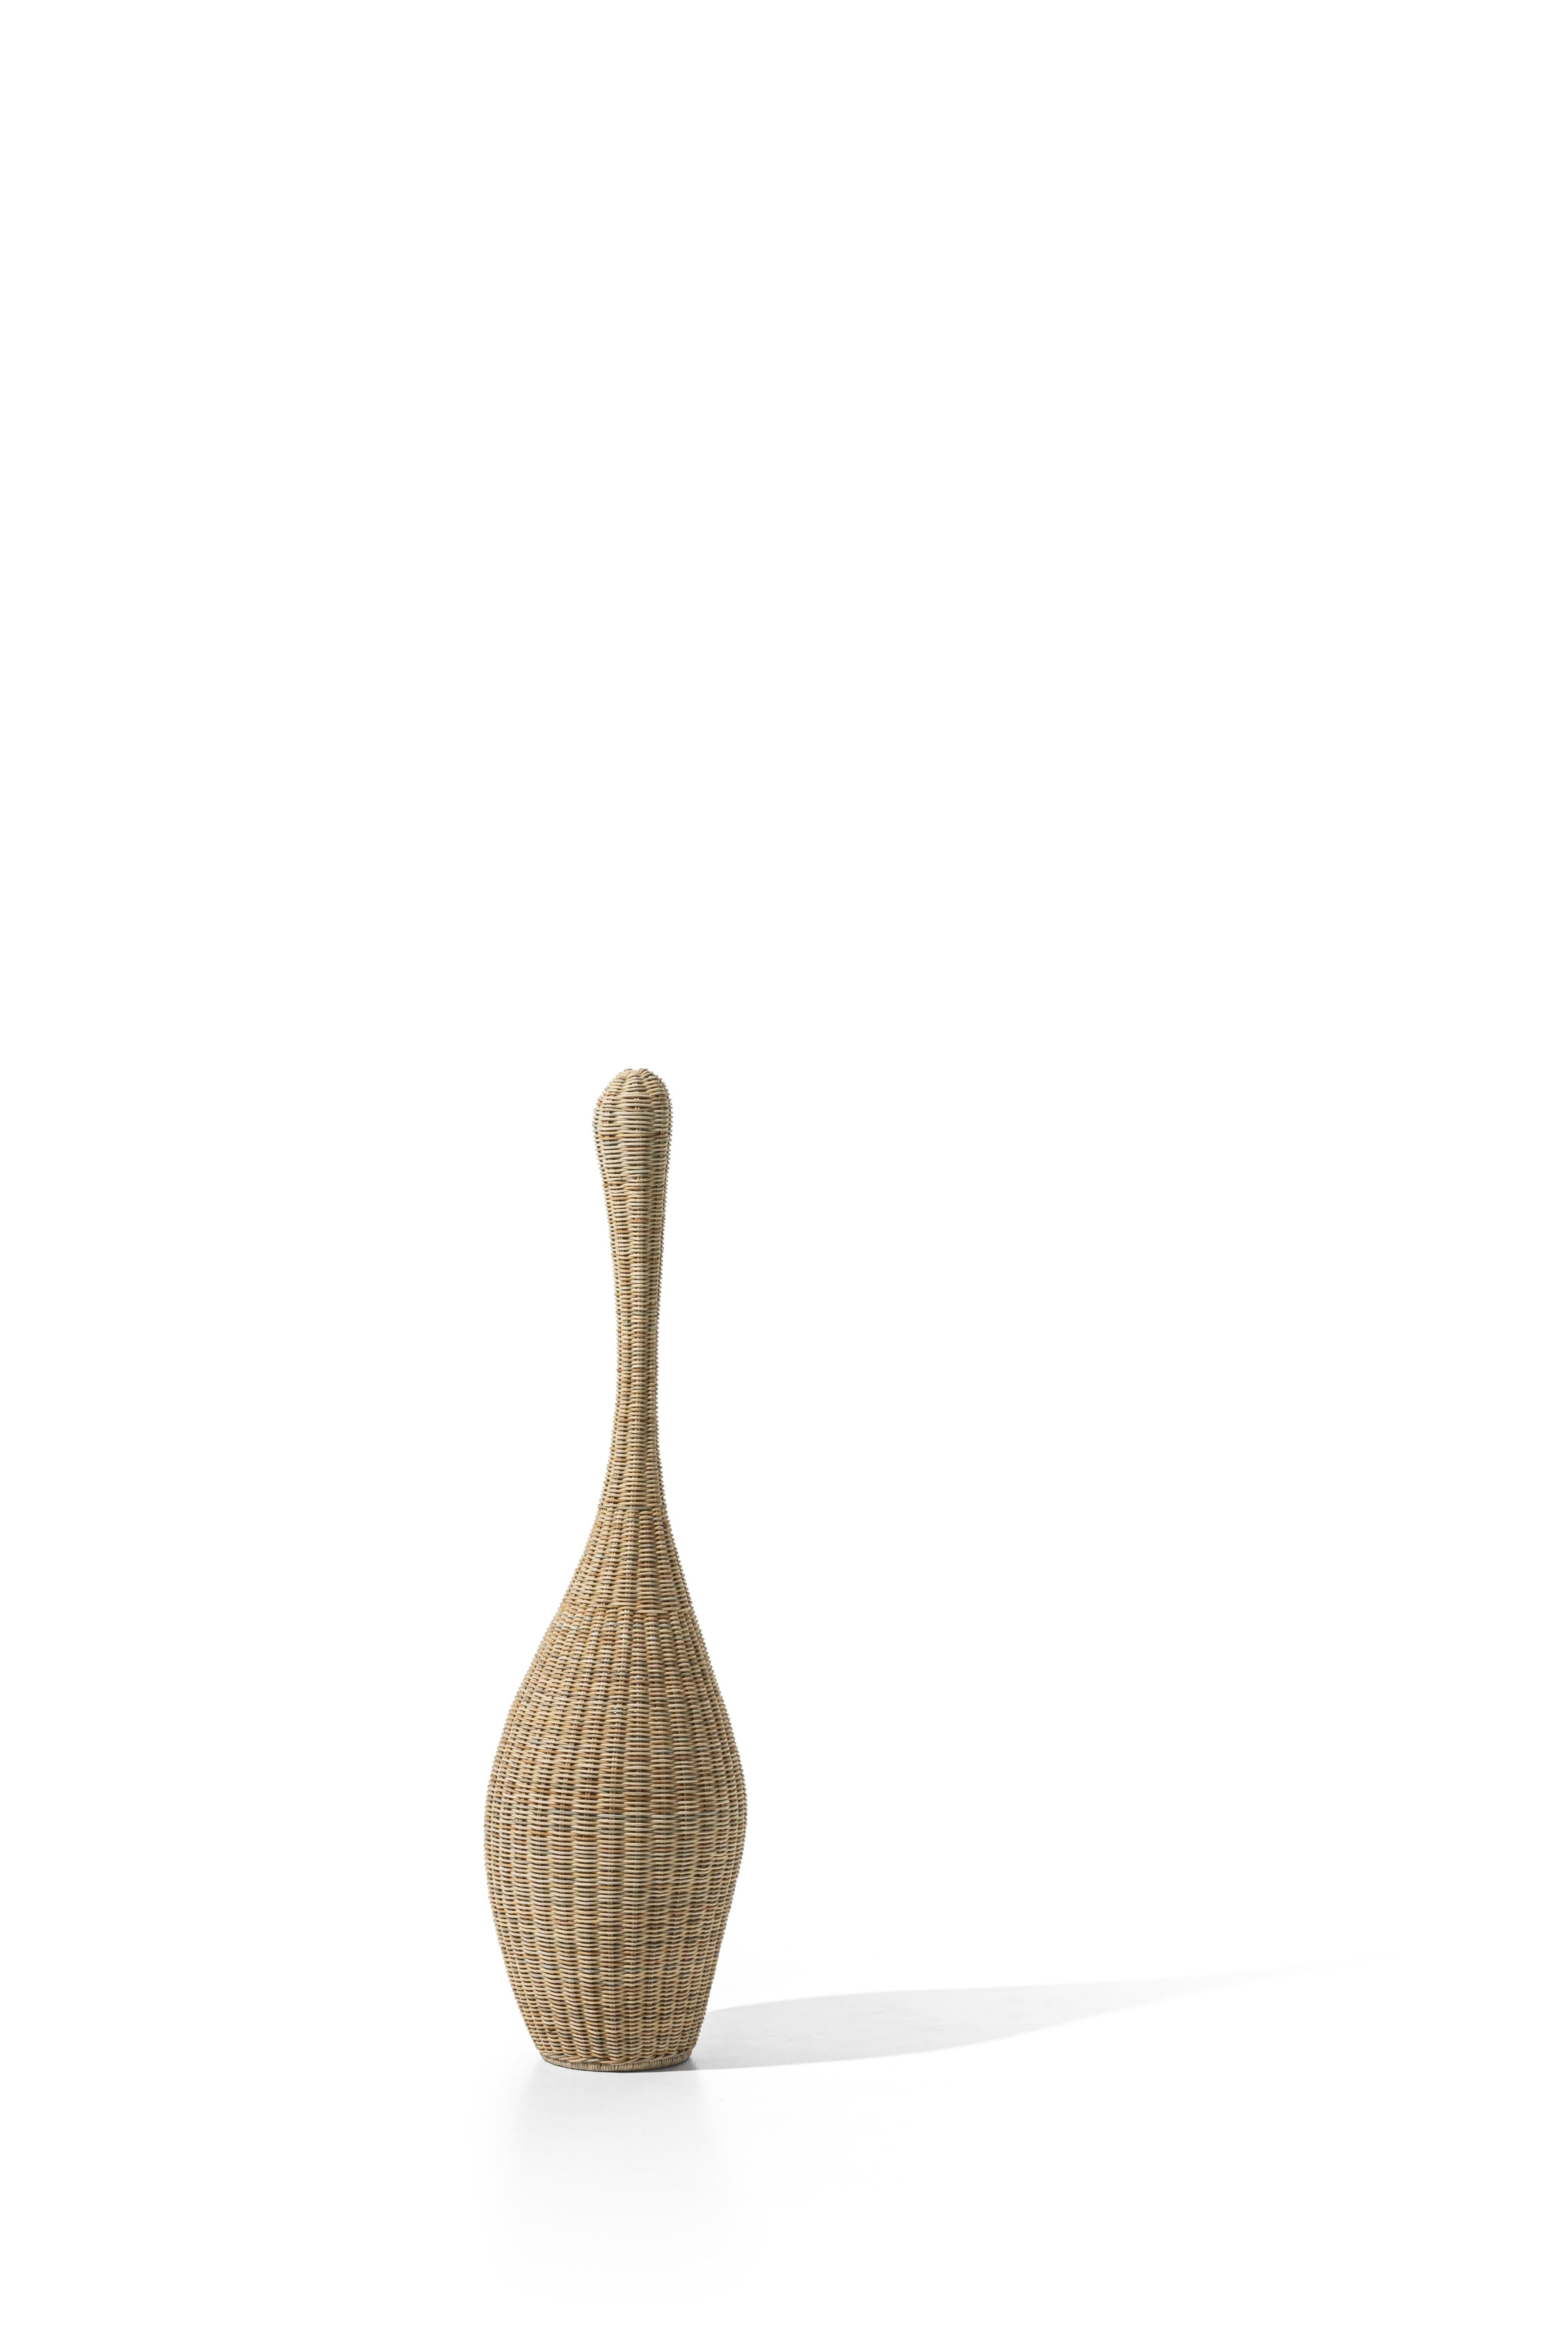 Family of lamps made entirely of natural mélange woven wicker or lacquered in matt white, grey, black, ocean or dove-grey, characterised by a shape that recalls that of a bottle and by a skilful play of workmanship, shapes and colours. The products